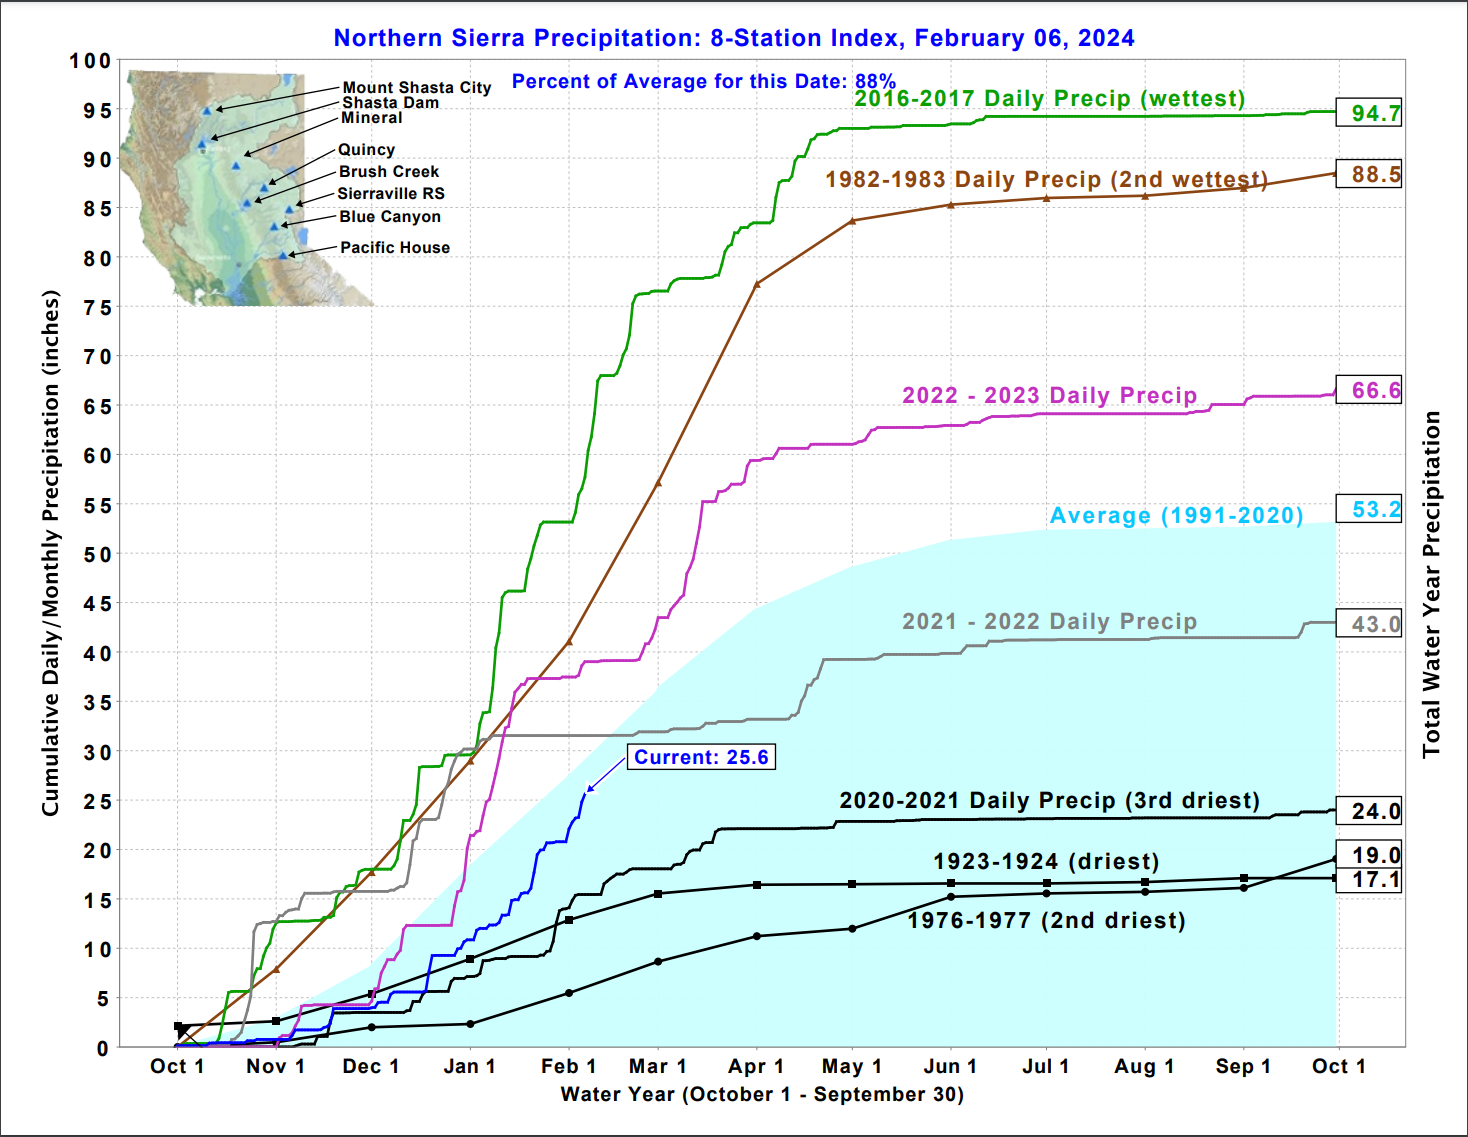 Graphic showing Northern Sierra Precipitation Over Time with the average total water year precipitation between 1991 and 2020 being 53 inches per year. 